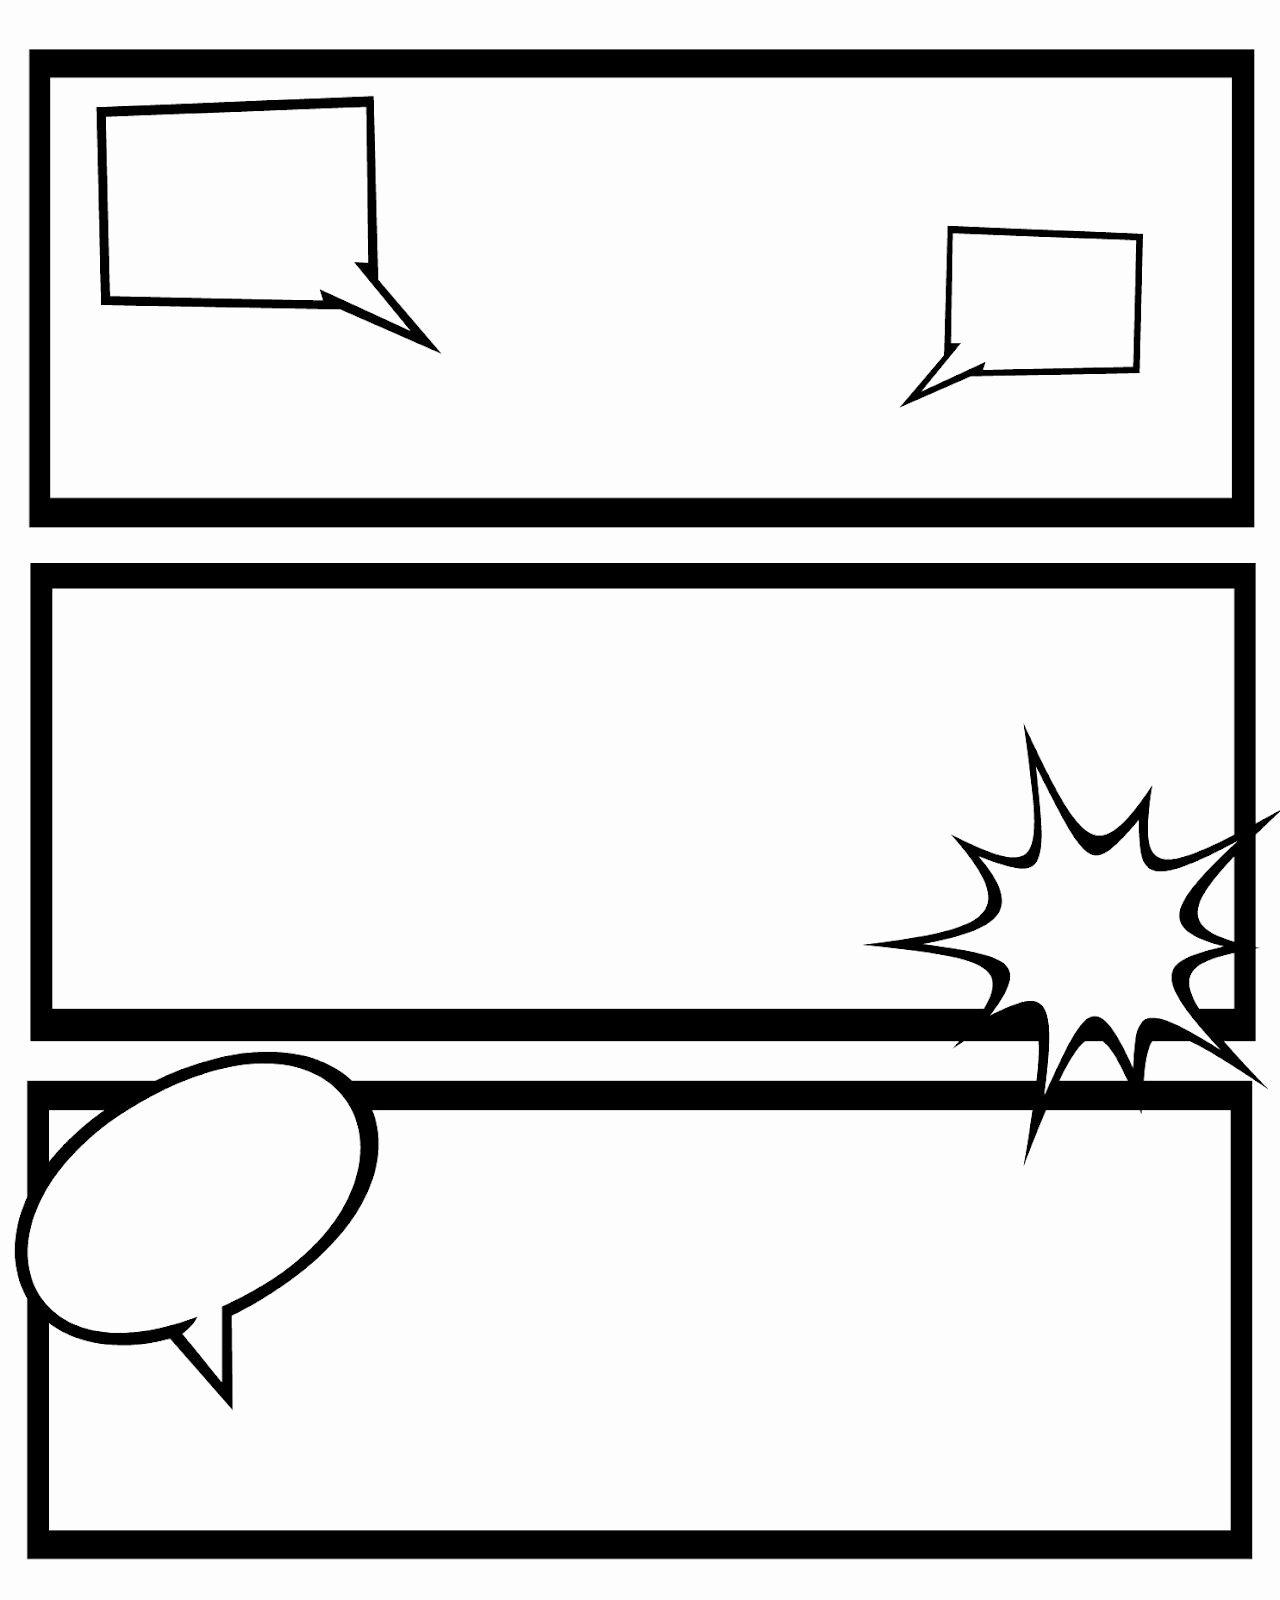 Comic Strip Template Word Fresh Printable Ic Strips for Narration Sweet Hot Mess